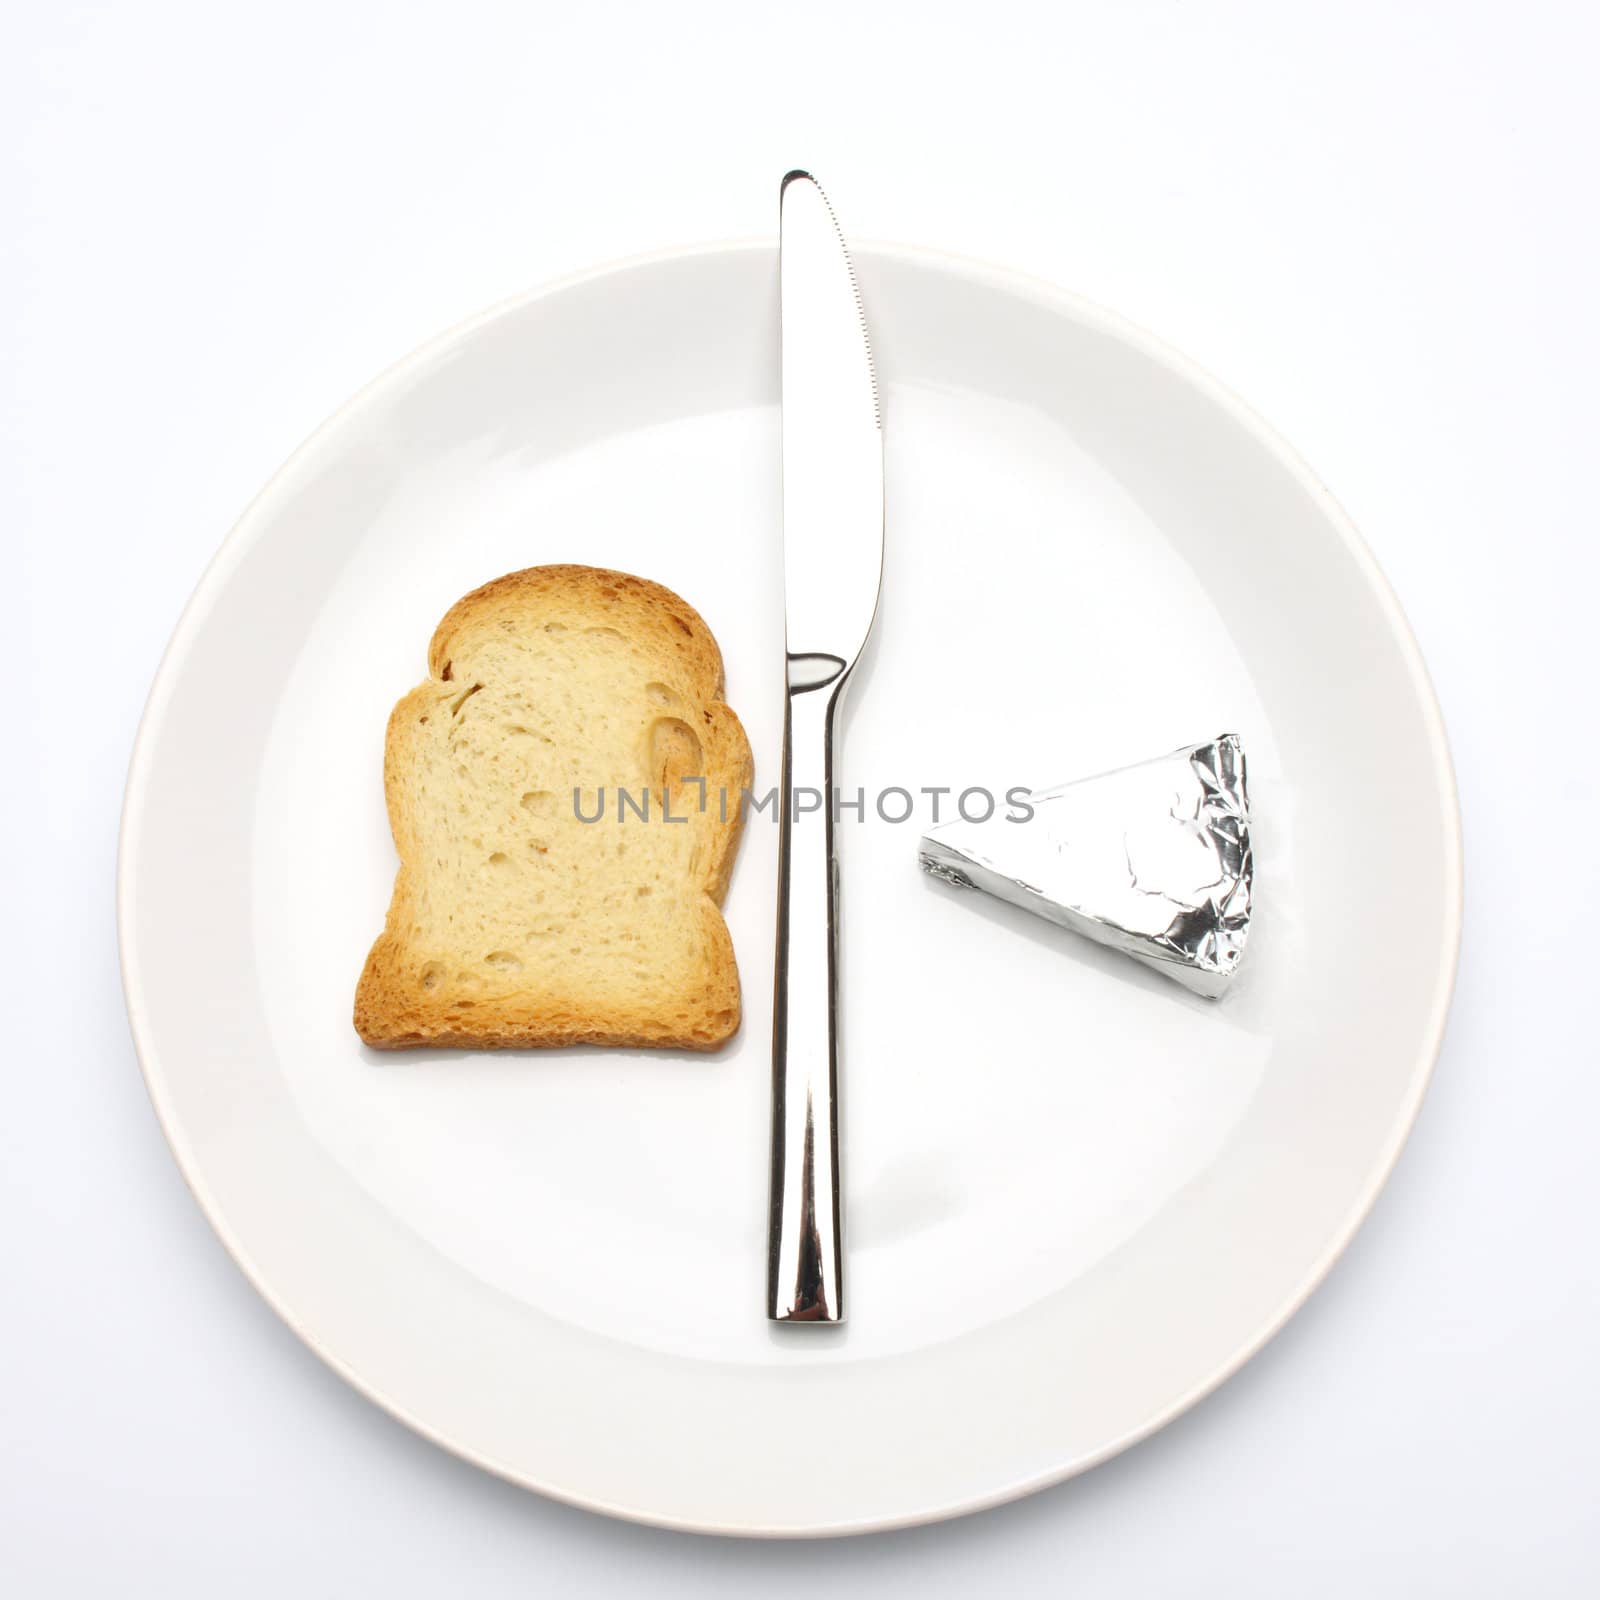  rusk bread slice, cheese and knife by alexkosev